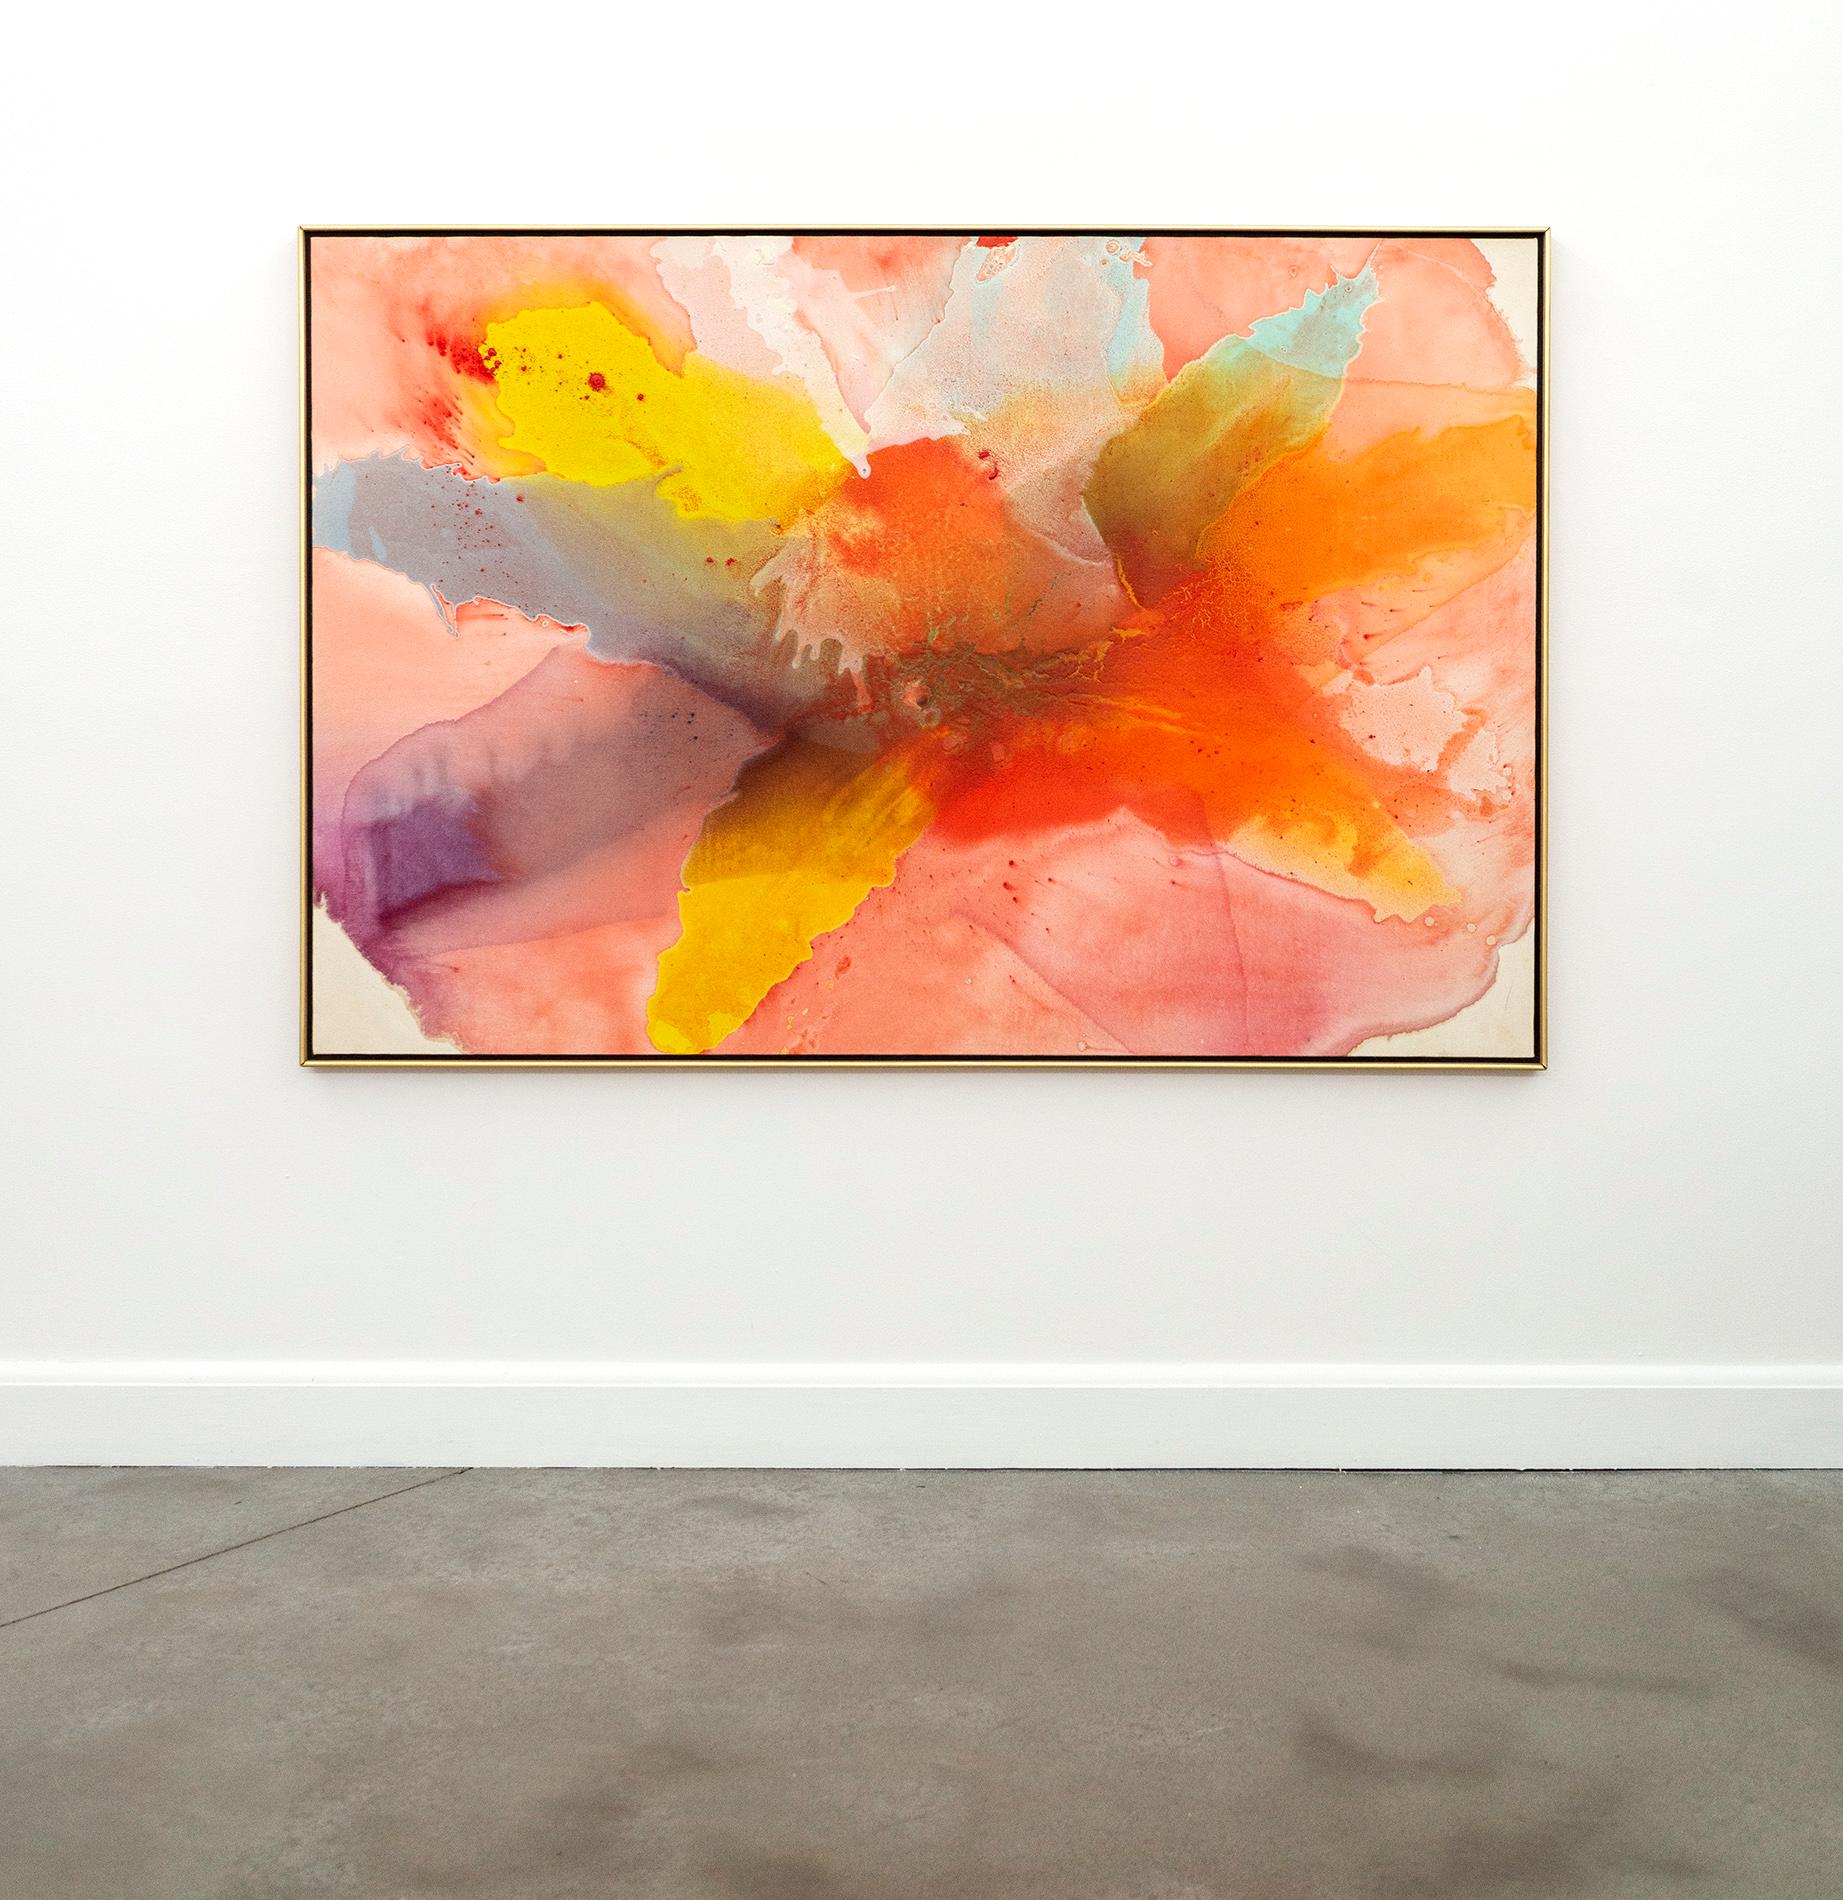 Harold Feist’s gloriously colorful acrylic abstract painting called Chanson radiates joy. Known for his innovative color field work, Feist has chosen a bright rainbow palette in broad gestural strokes of orange, purple, blue, yellow, melon and